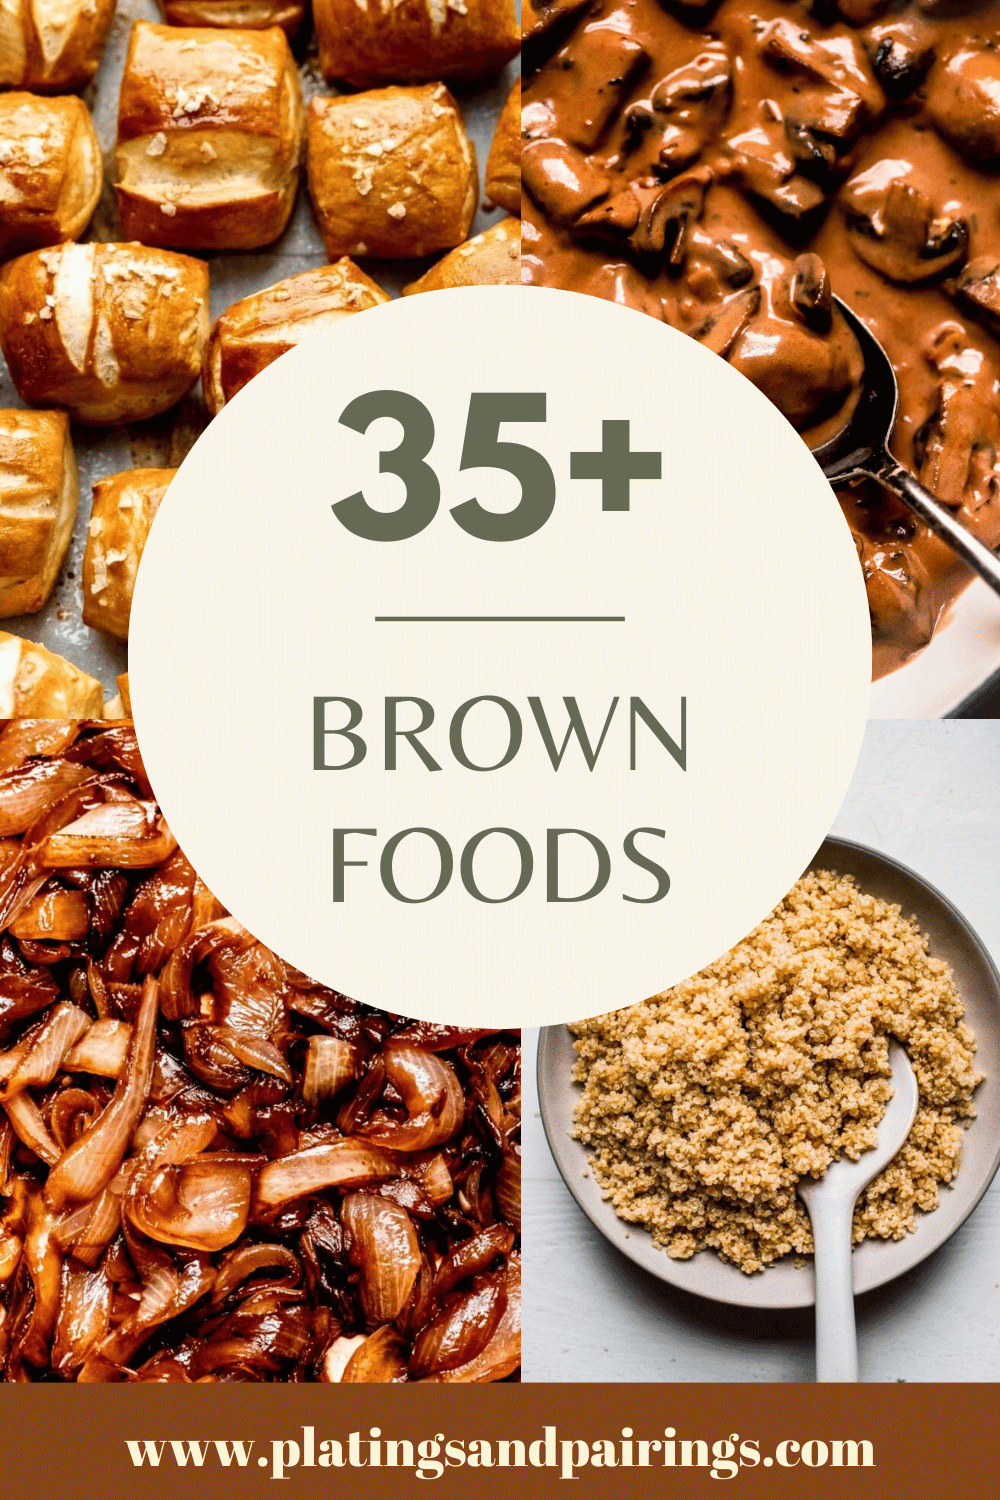 Collage of brown foods with text overlay.